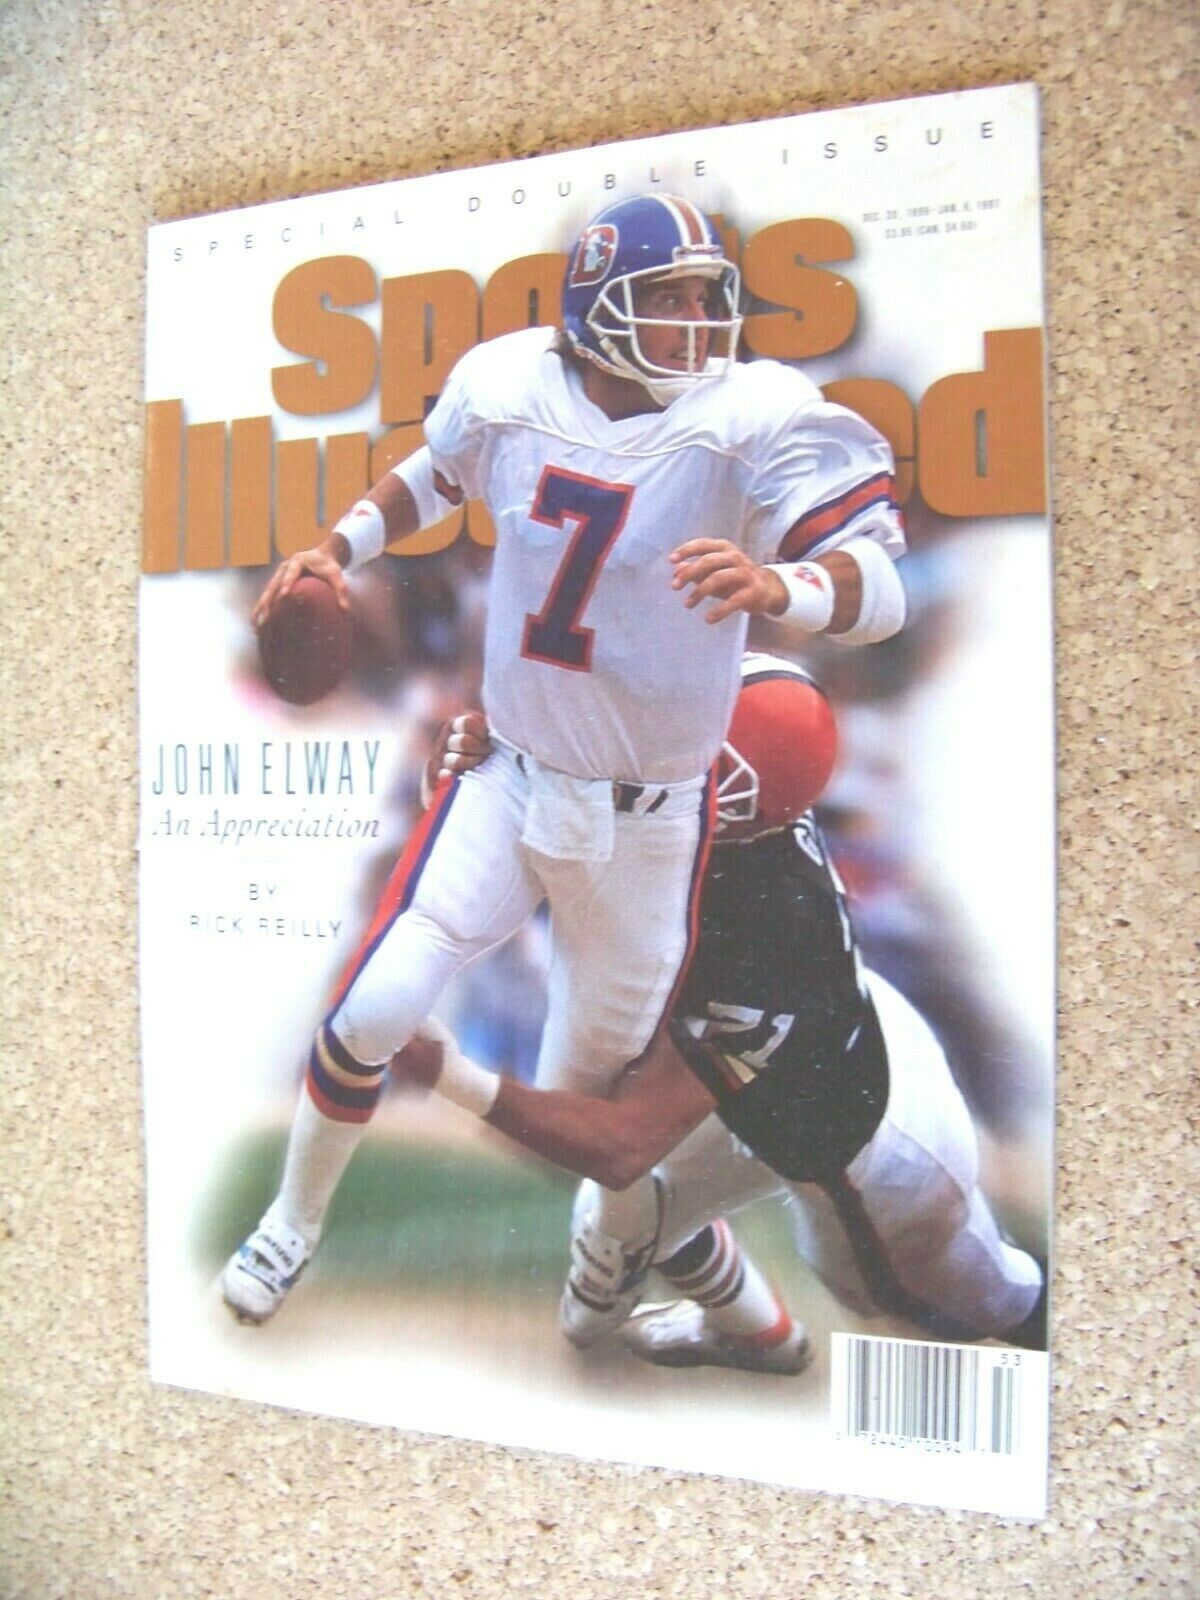 Special Double Issue Sports Illustrated John Elway Denver Broncos Magazine 96-97